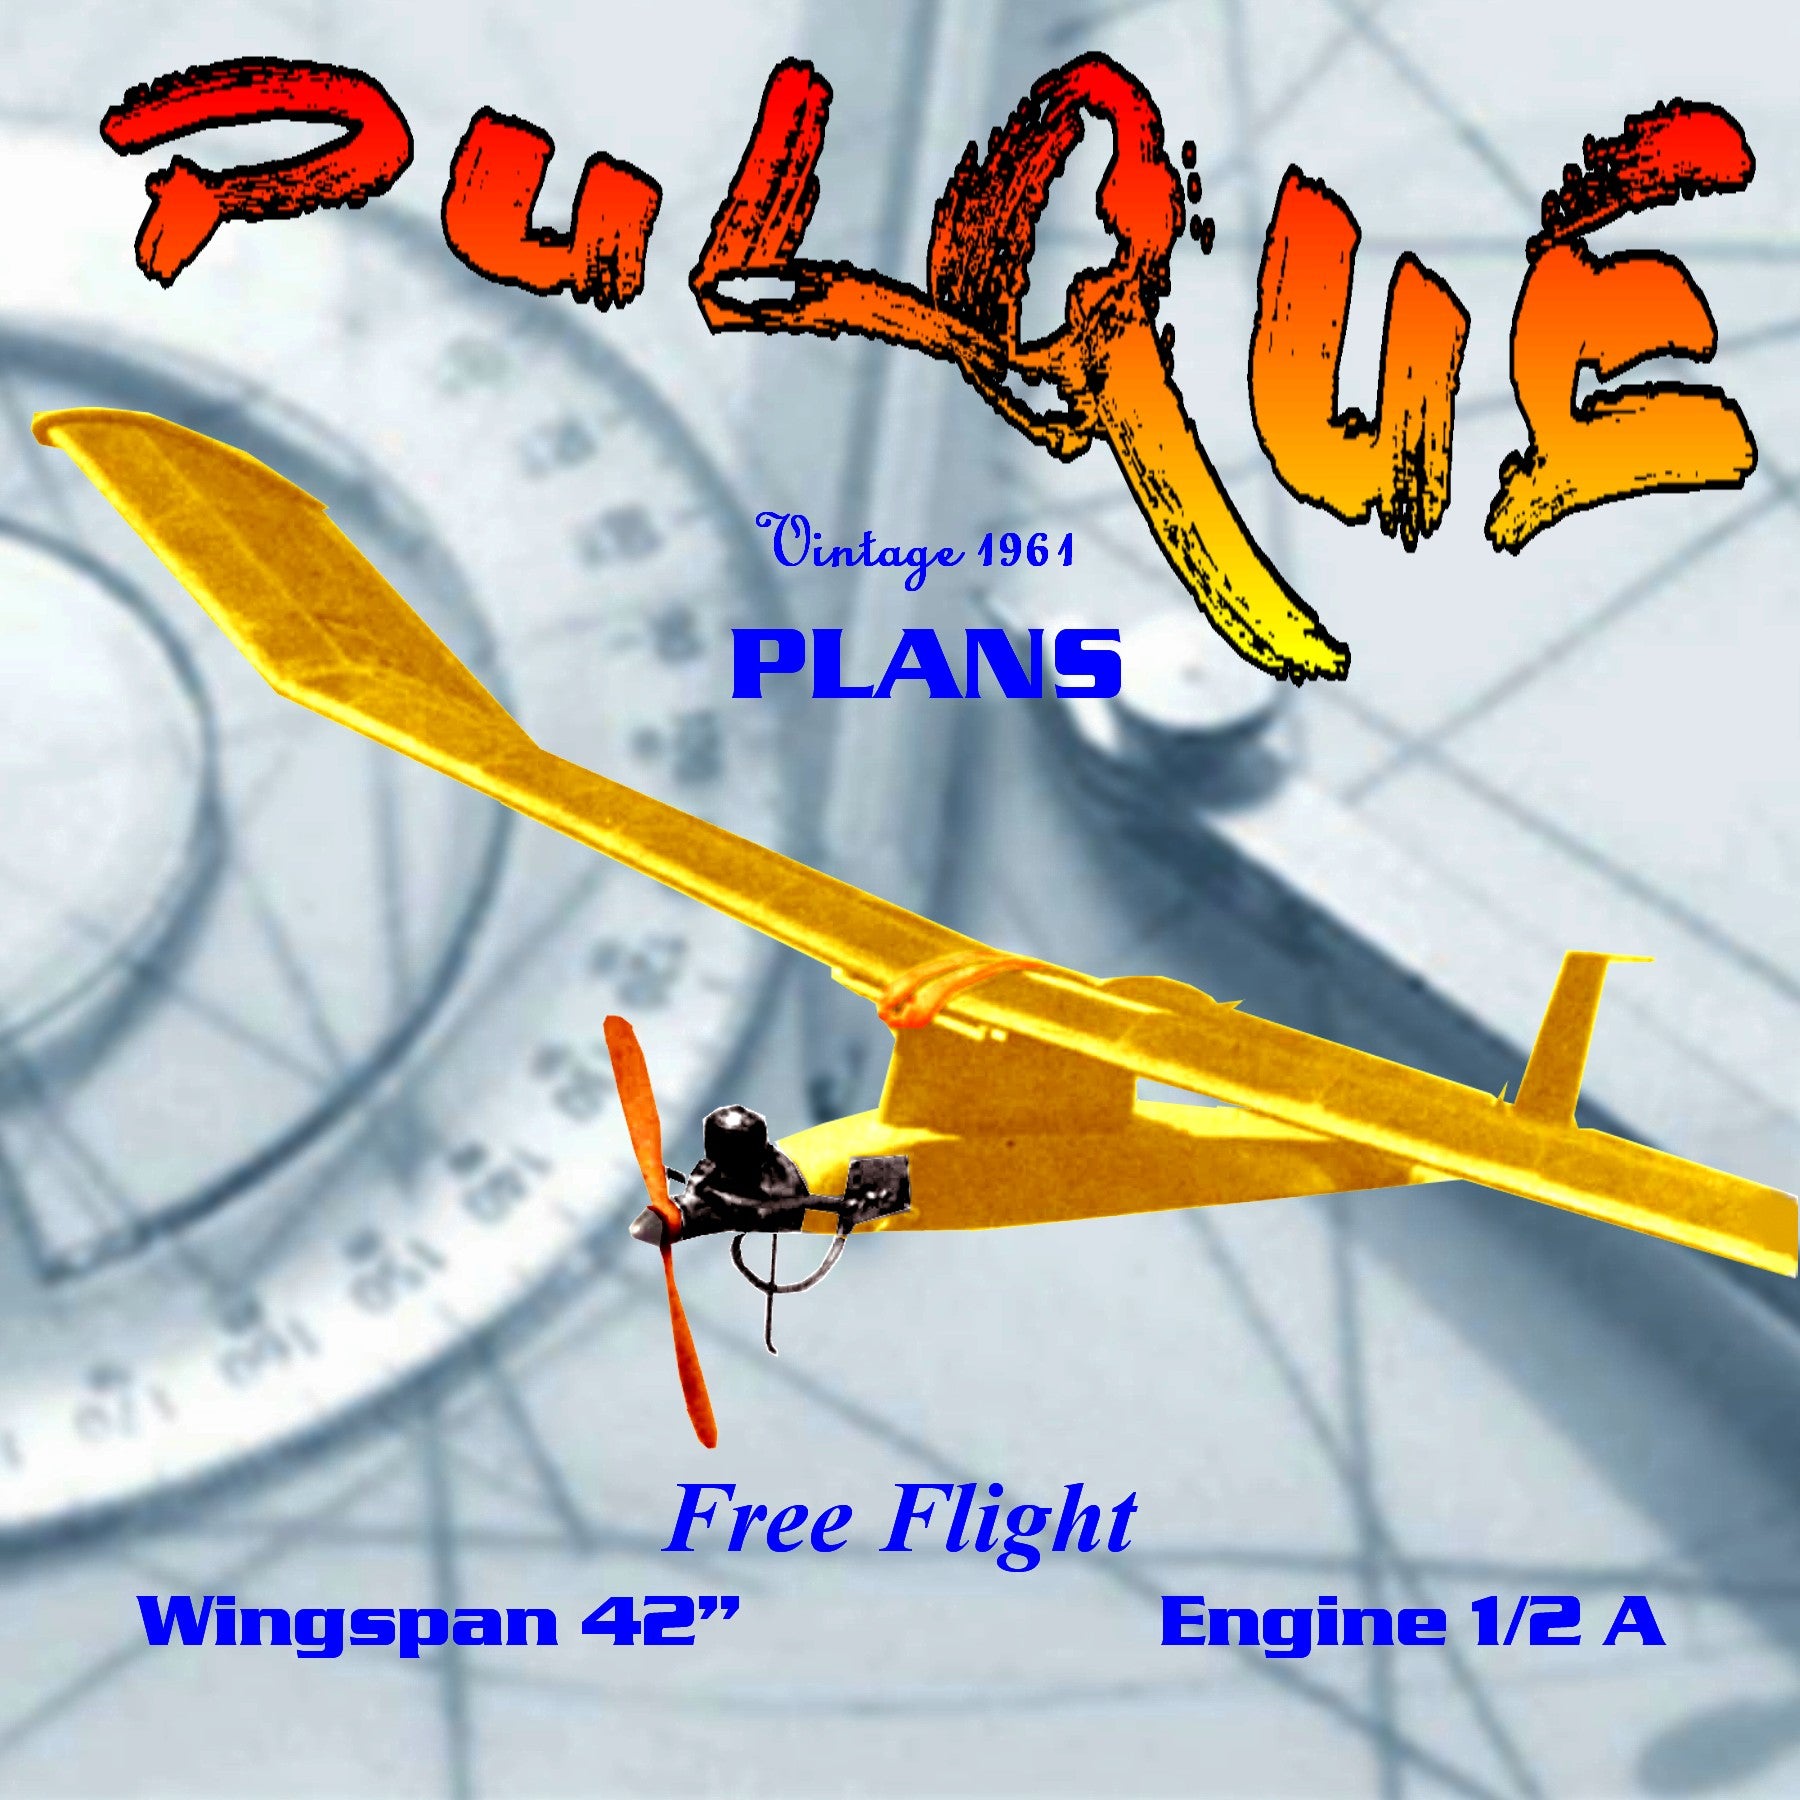 full size printed plan 1961 "pulque" free flight  w/s42”  engine 1/2a basic trainer that can also win